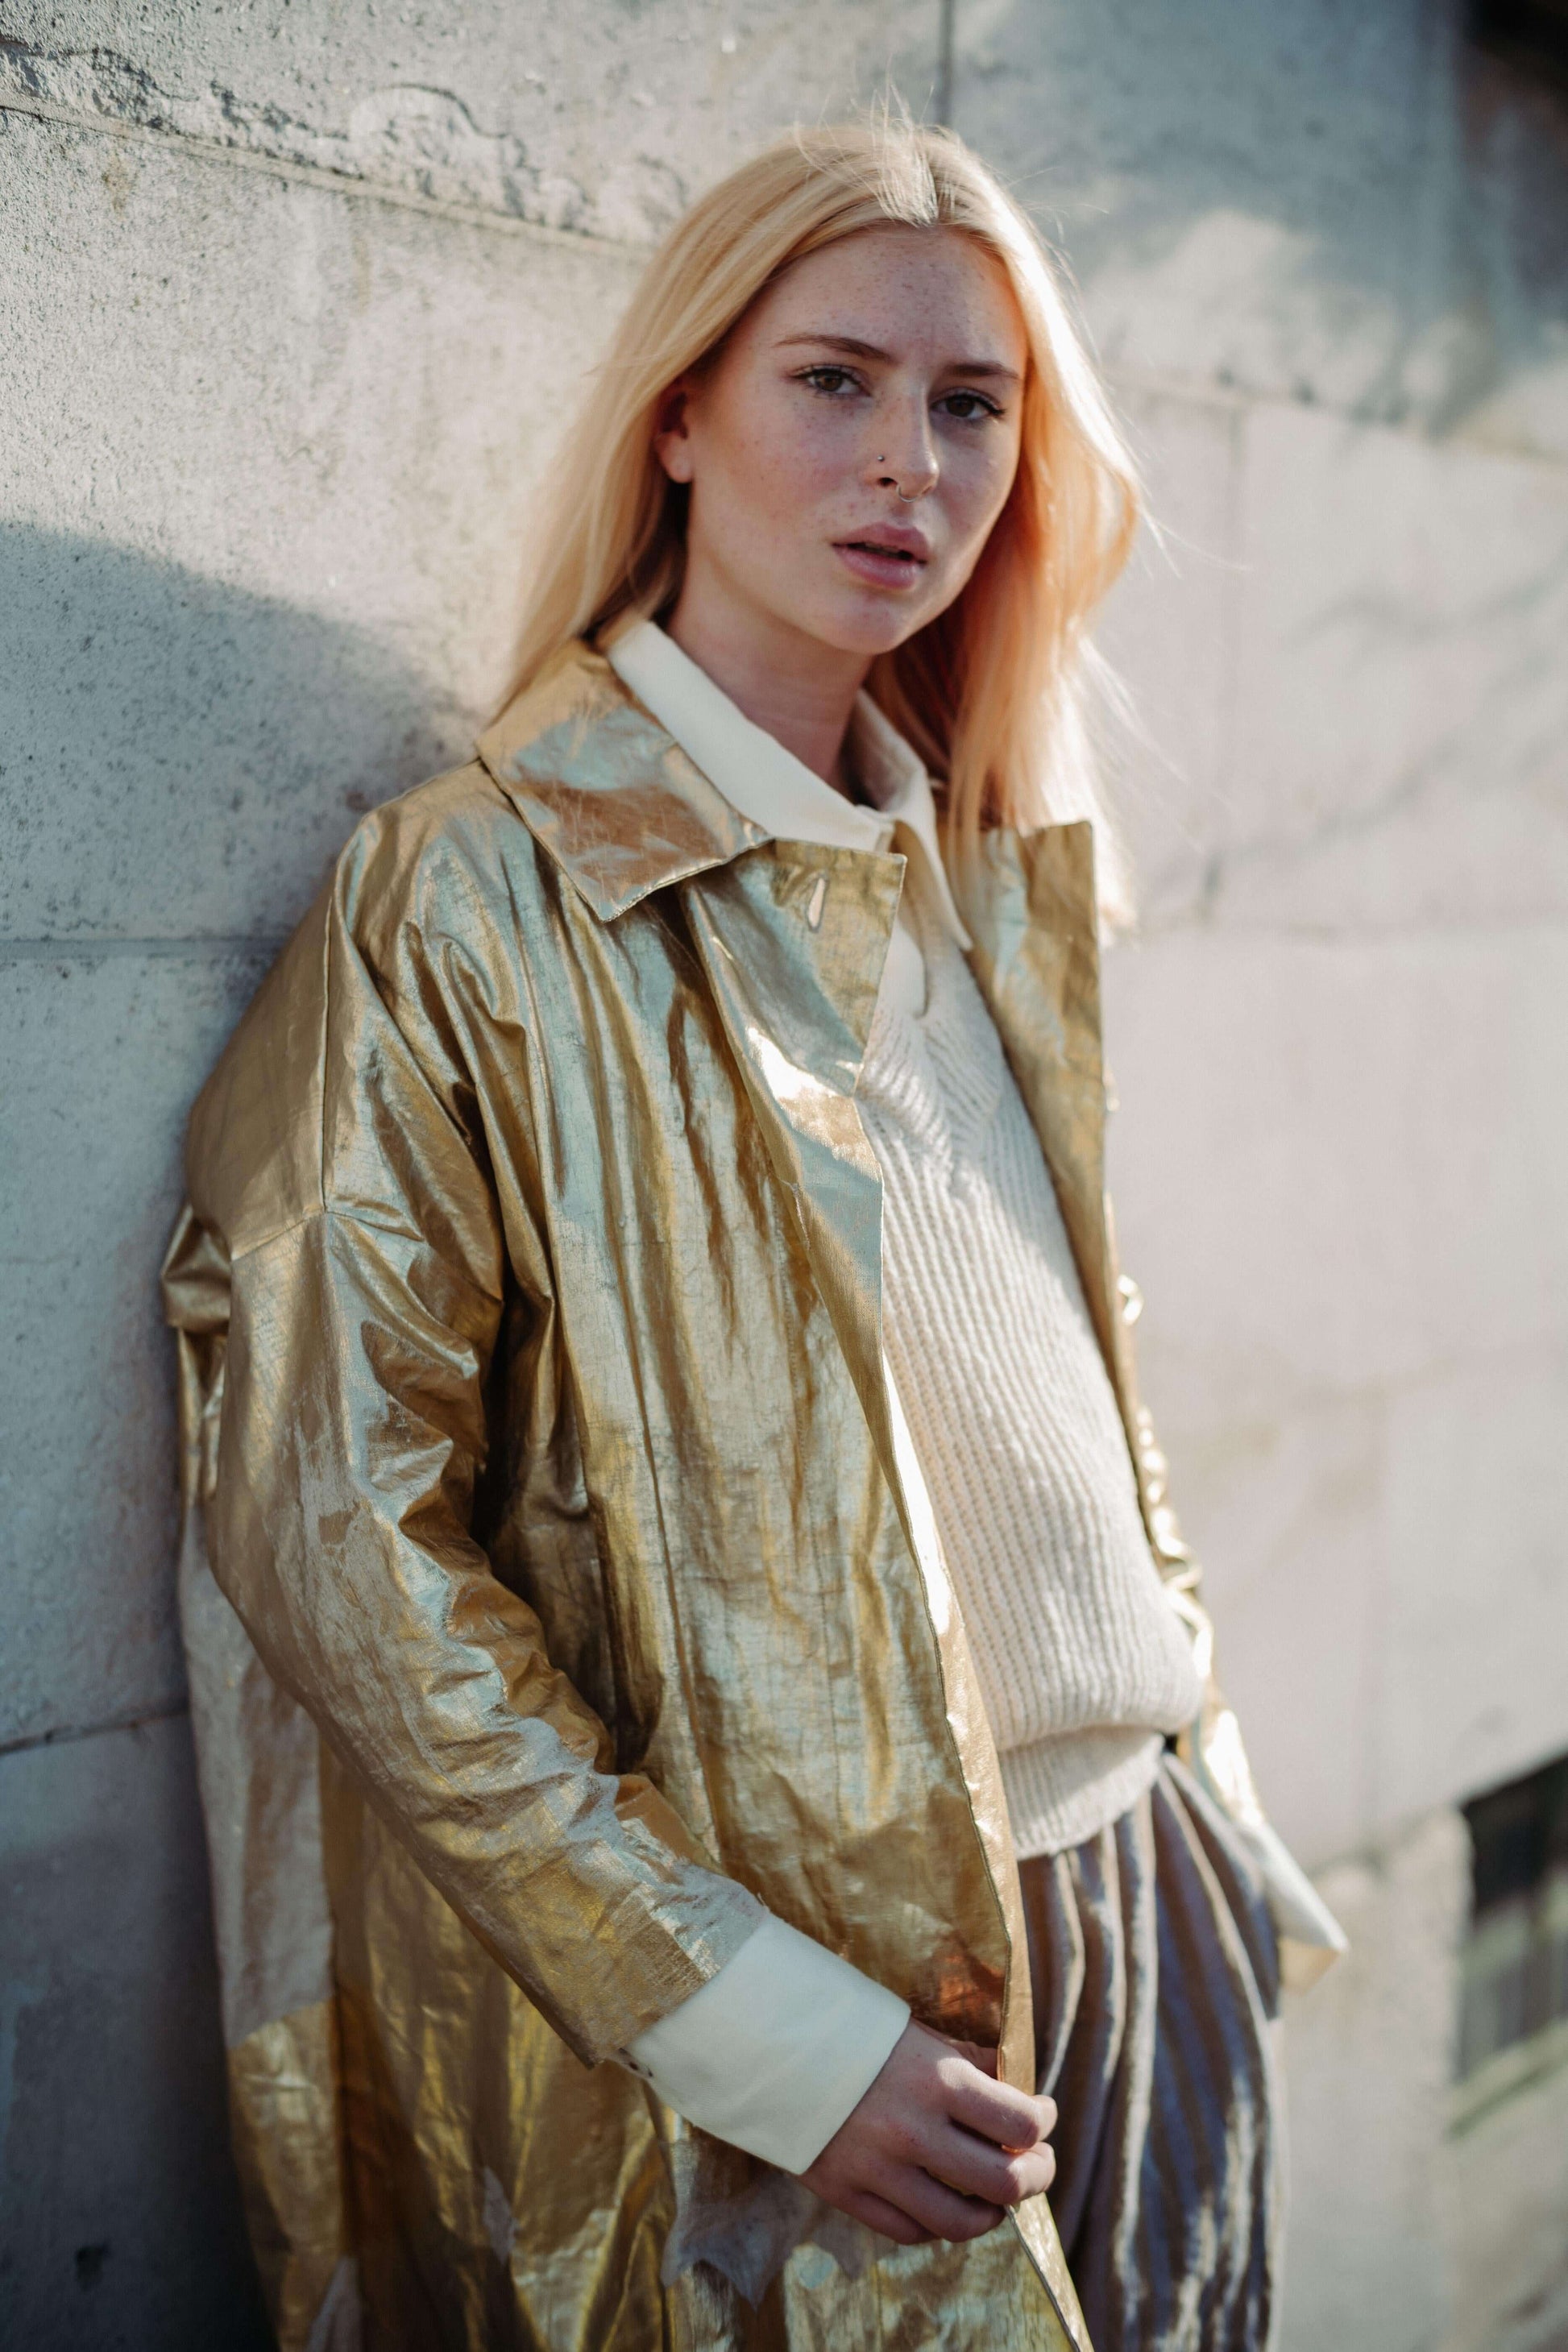  Our Hero Gold Coat, it tells a story of a modern spin on an age old tradition. 